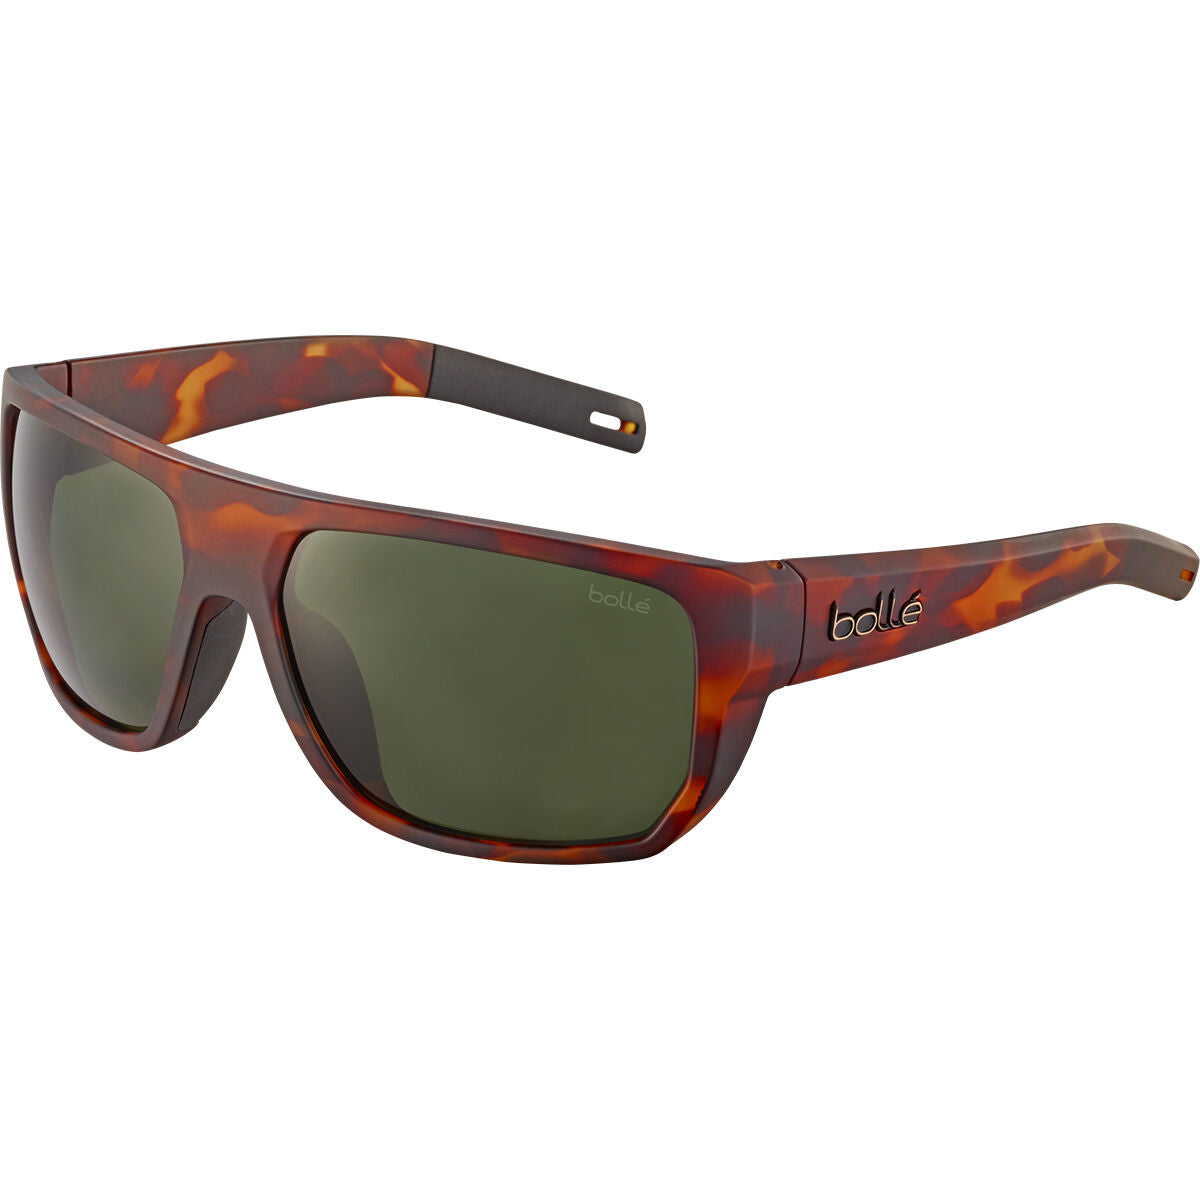 Bolle Vulture Sunglasses  Matte Tortoise Hd Polarized Axis One Size